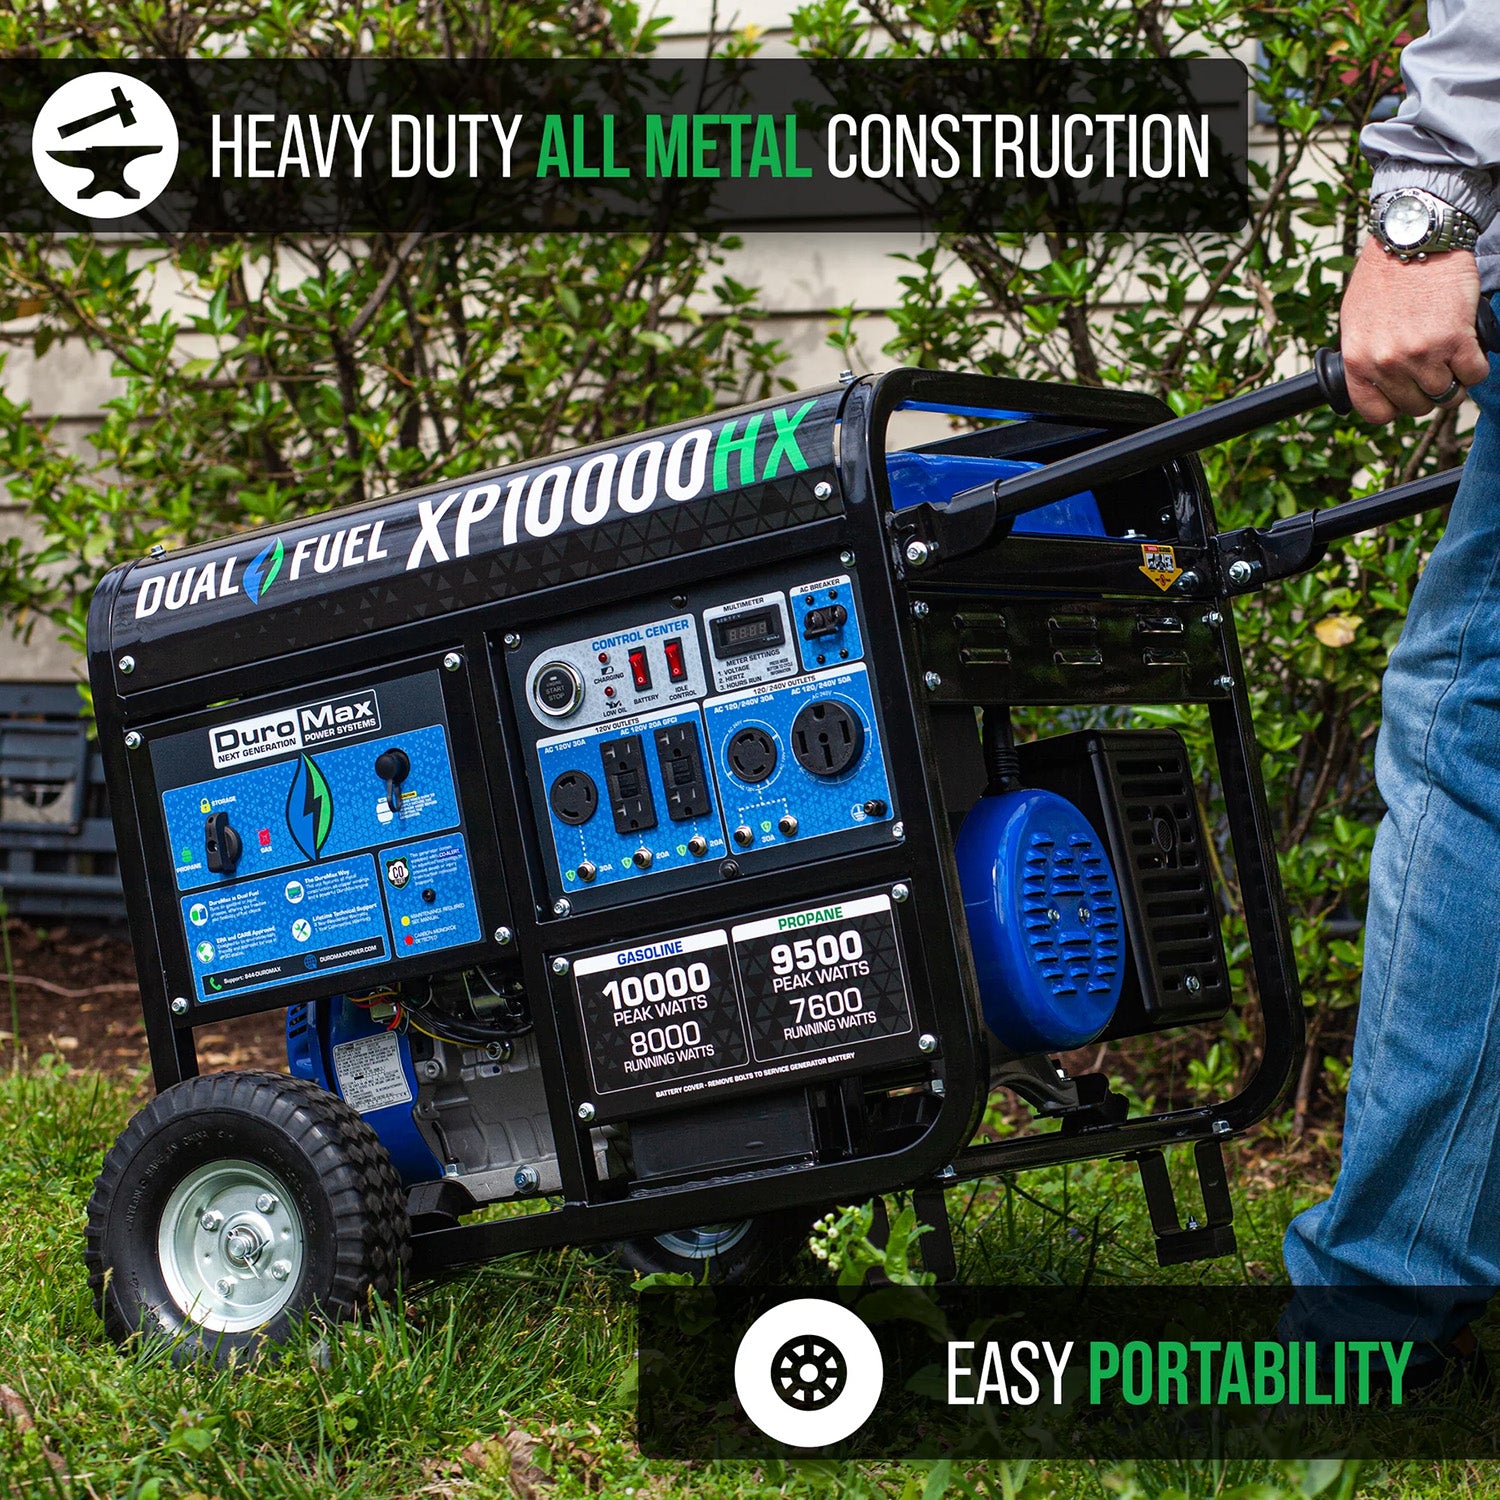 DuroMax XP10000HX Generator Has a Heavy Duty All-Metal Construction